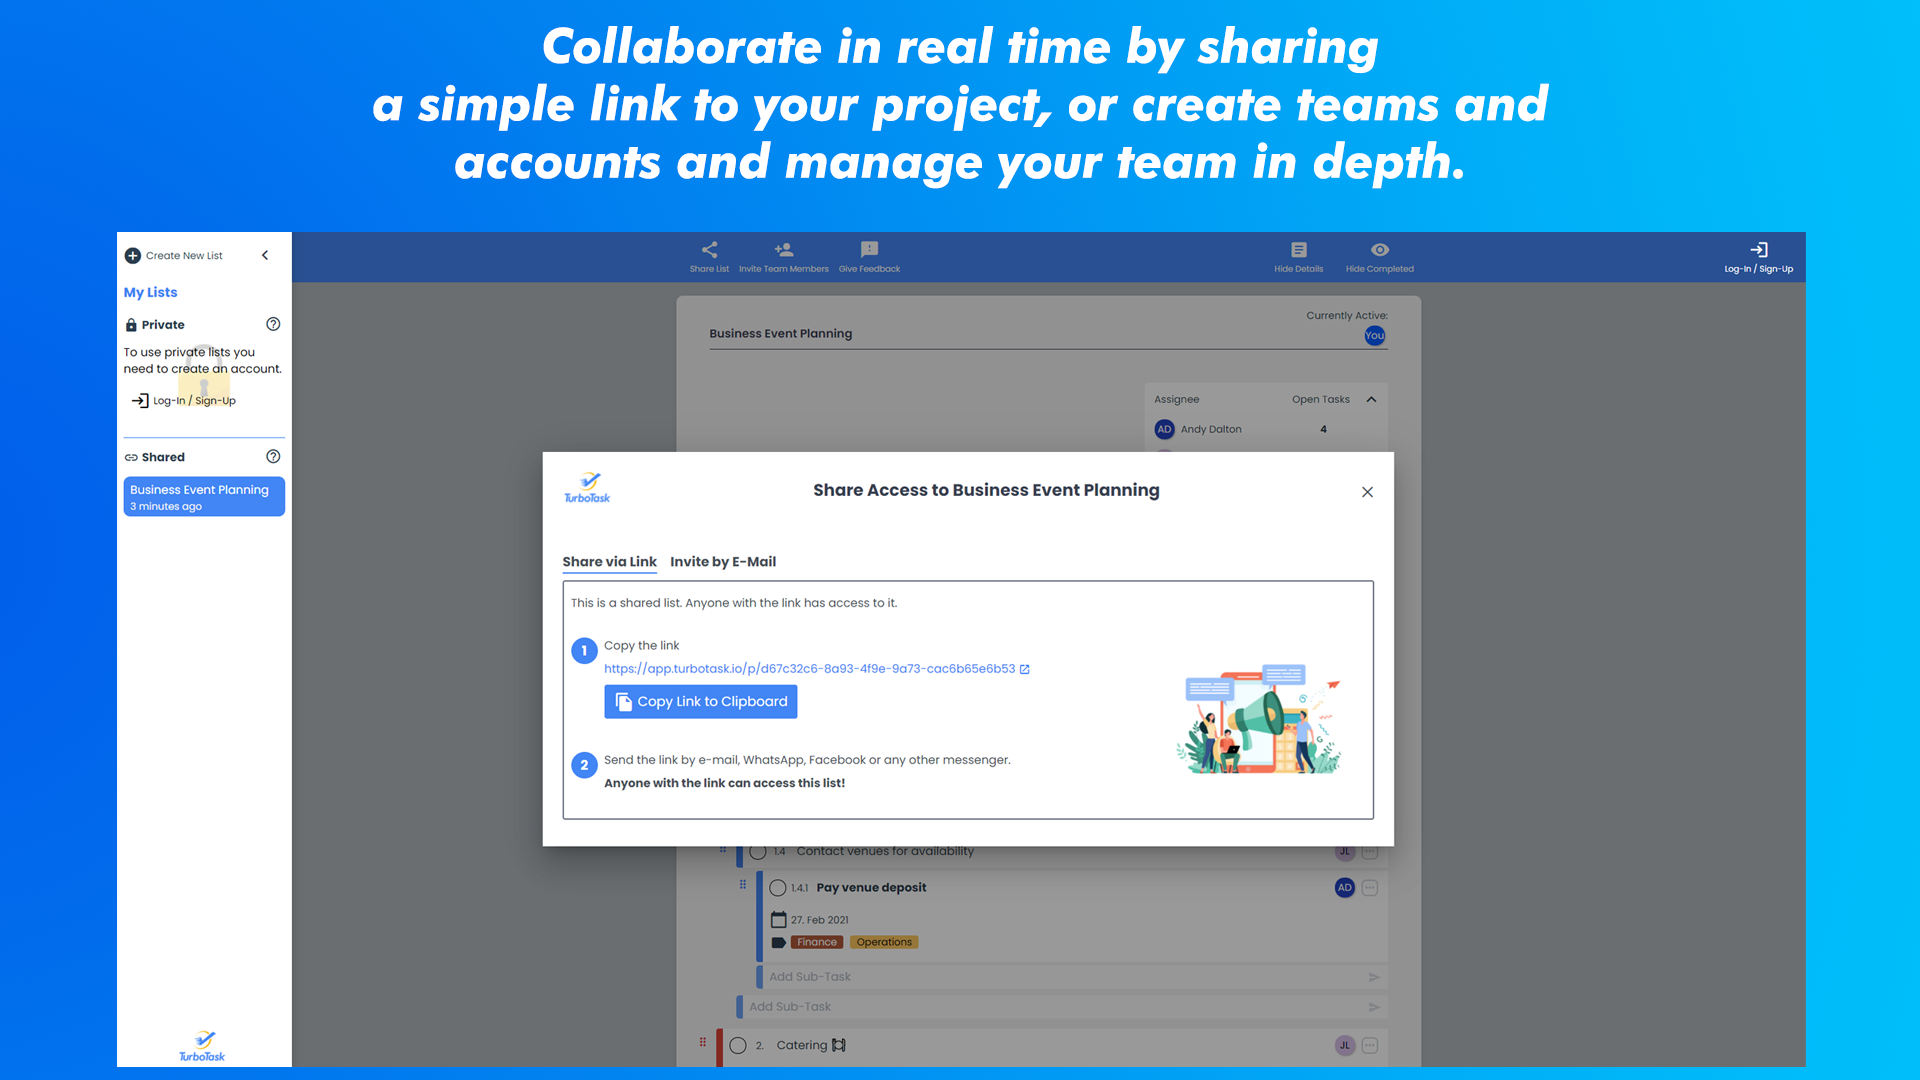 Collaborate in real time by sharing a simple link to your project, or create teams and accounts and manage your team in depth.